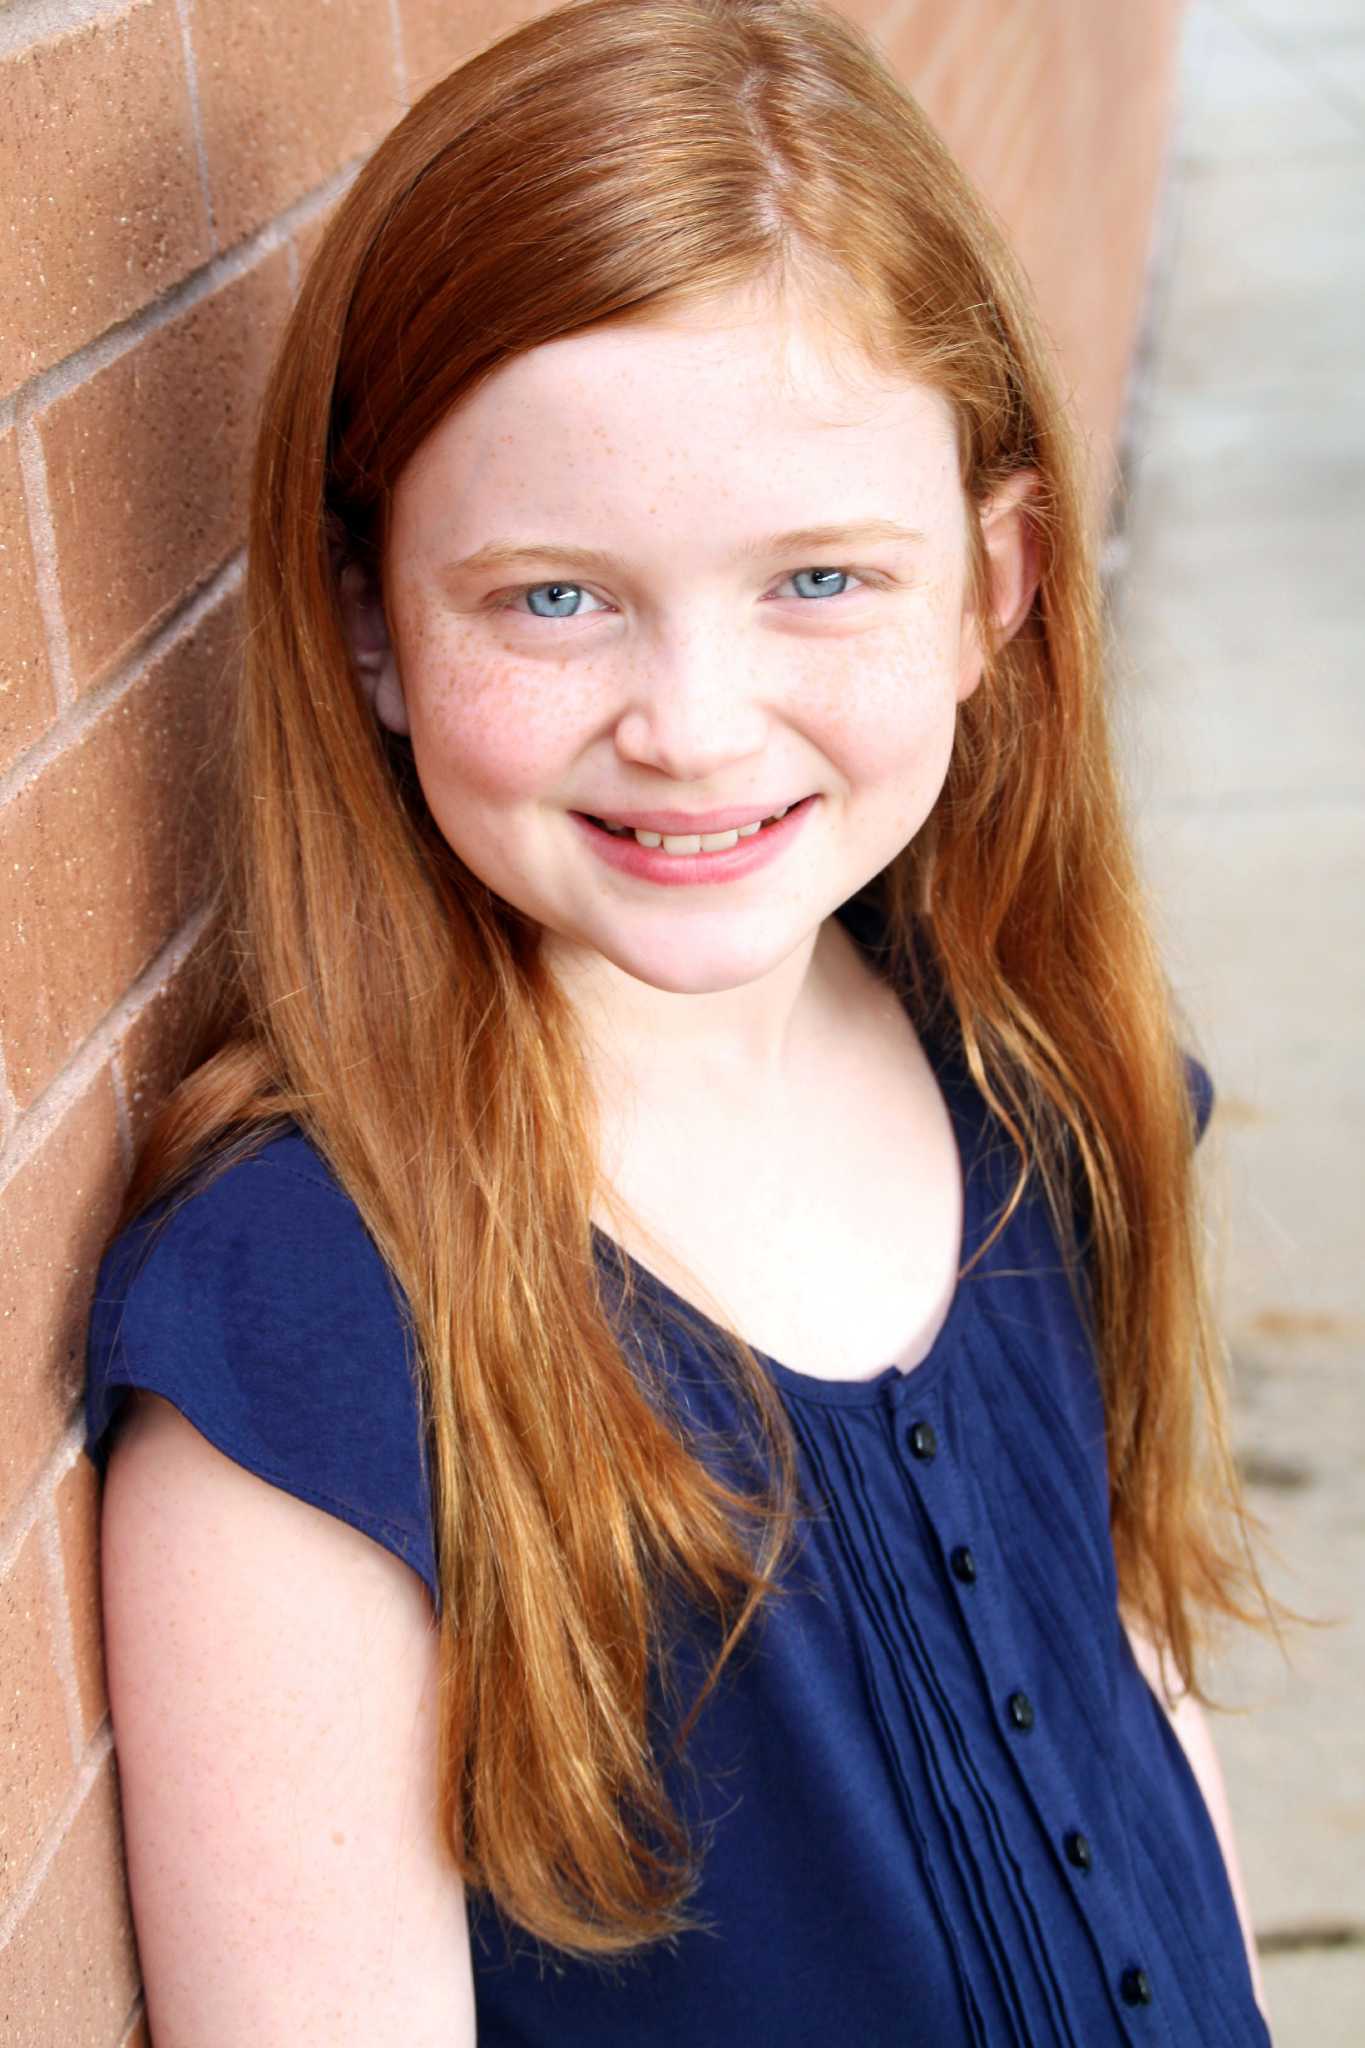 On Broadway: Houstonian to star in "Annie"